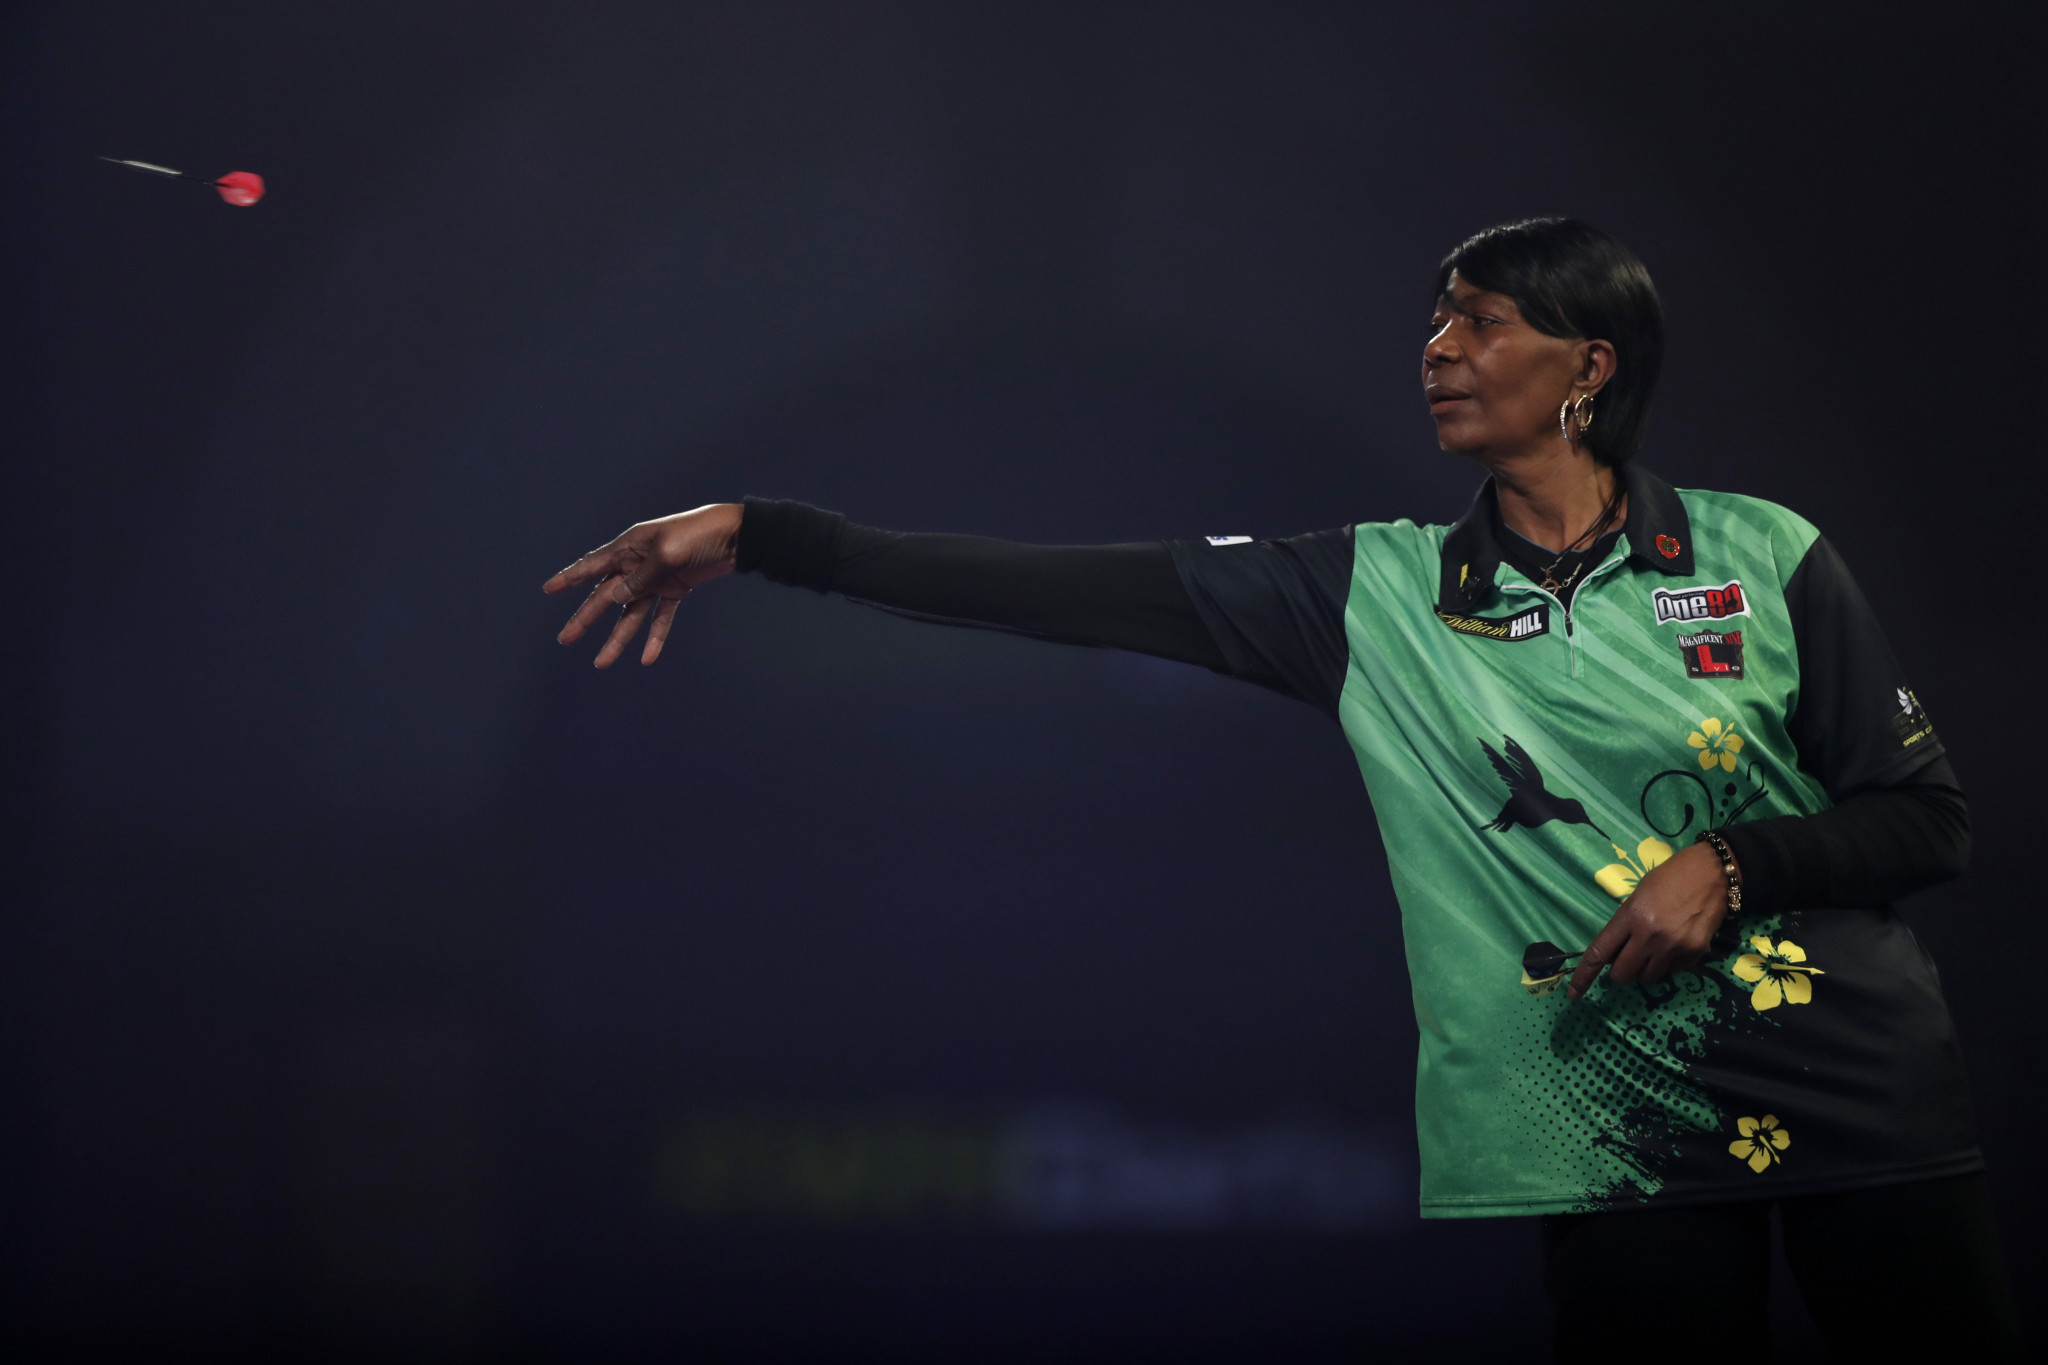 England's Deta Hedman was defeated by compatriot Andy Boulton as she aimed to follow in the footsteps of Fallon Sherrock as a female winner of a match at the PDC World Darts Championship ©Getty Images